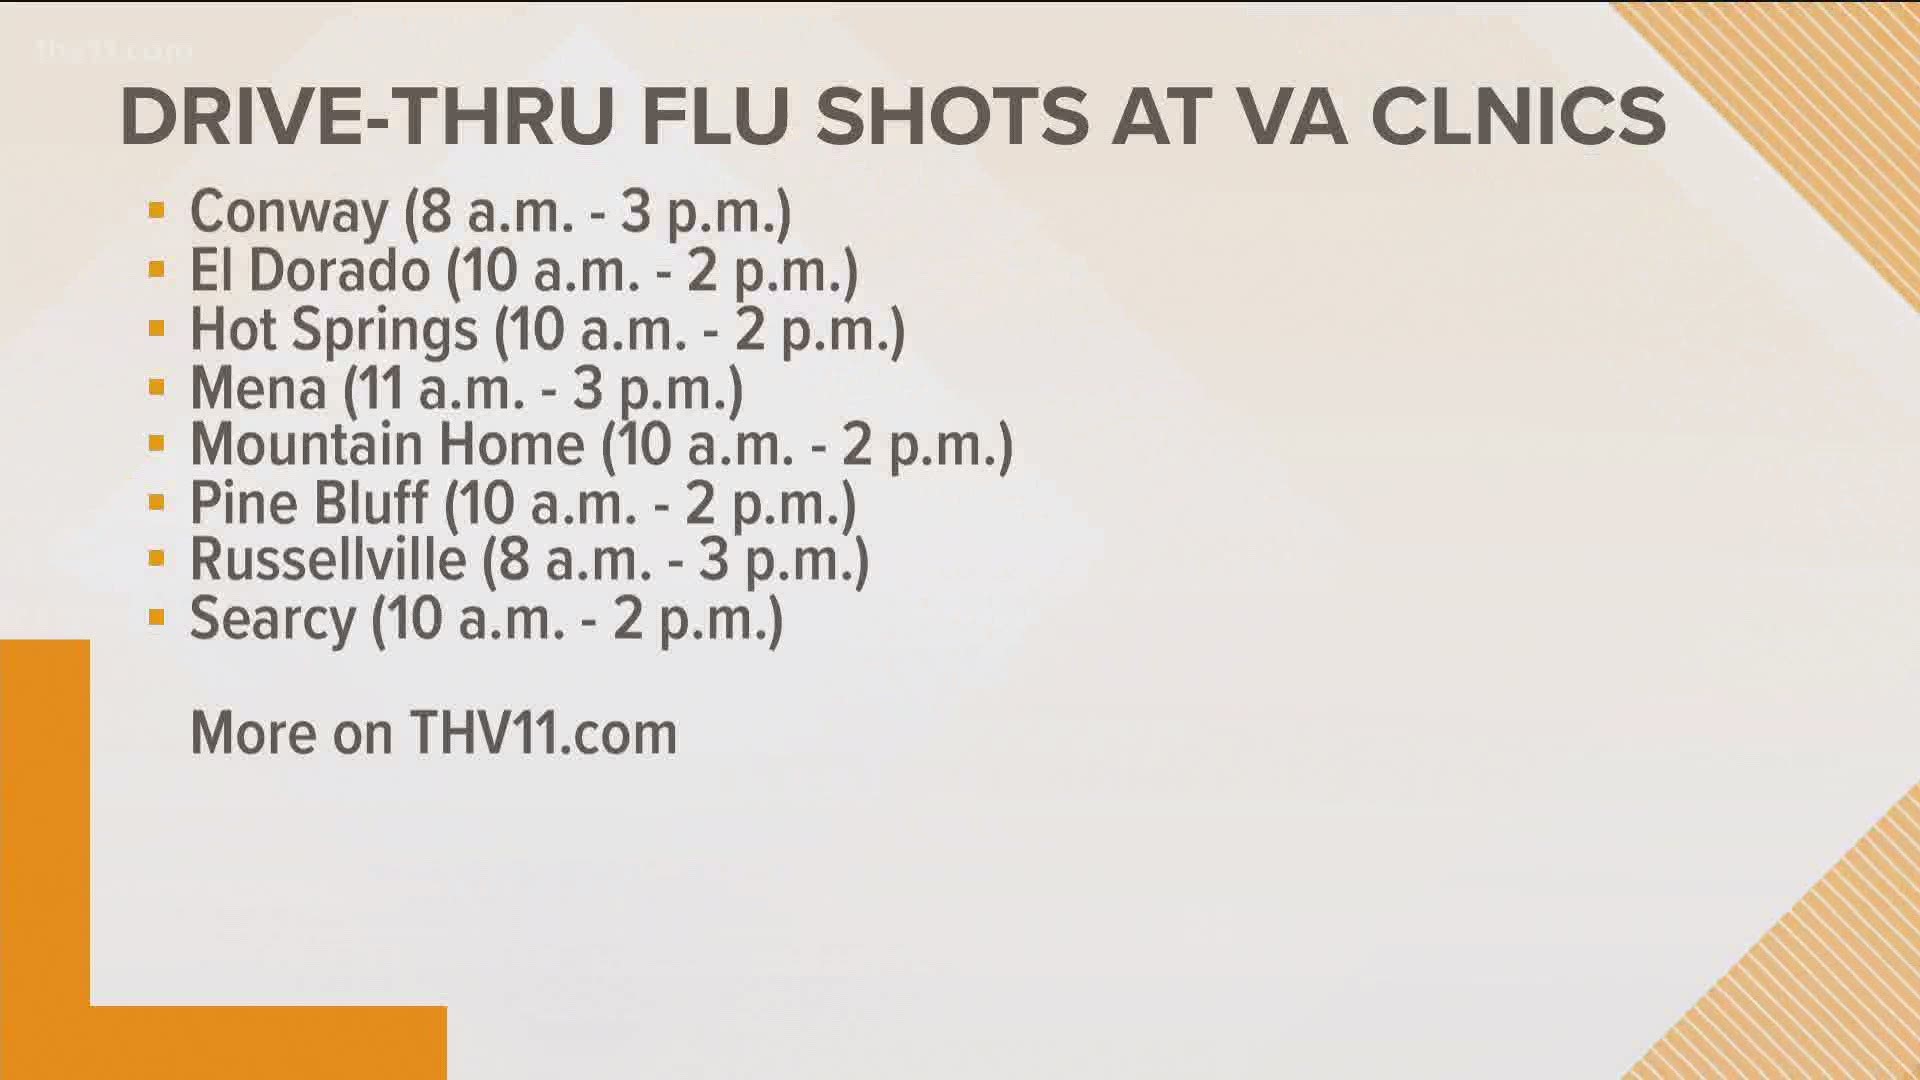 With flu season approaching local VA clinics are making sure our veterans are protected.